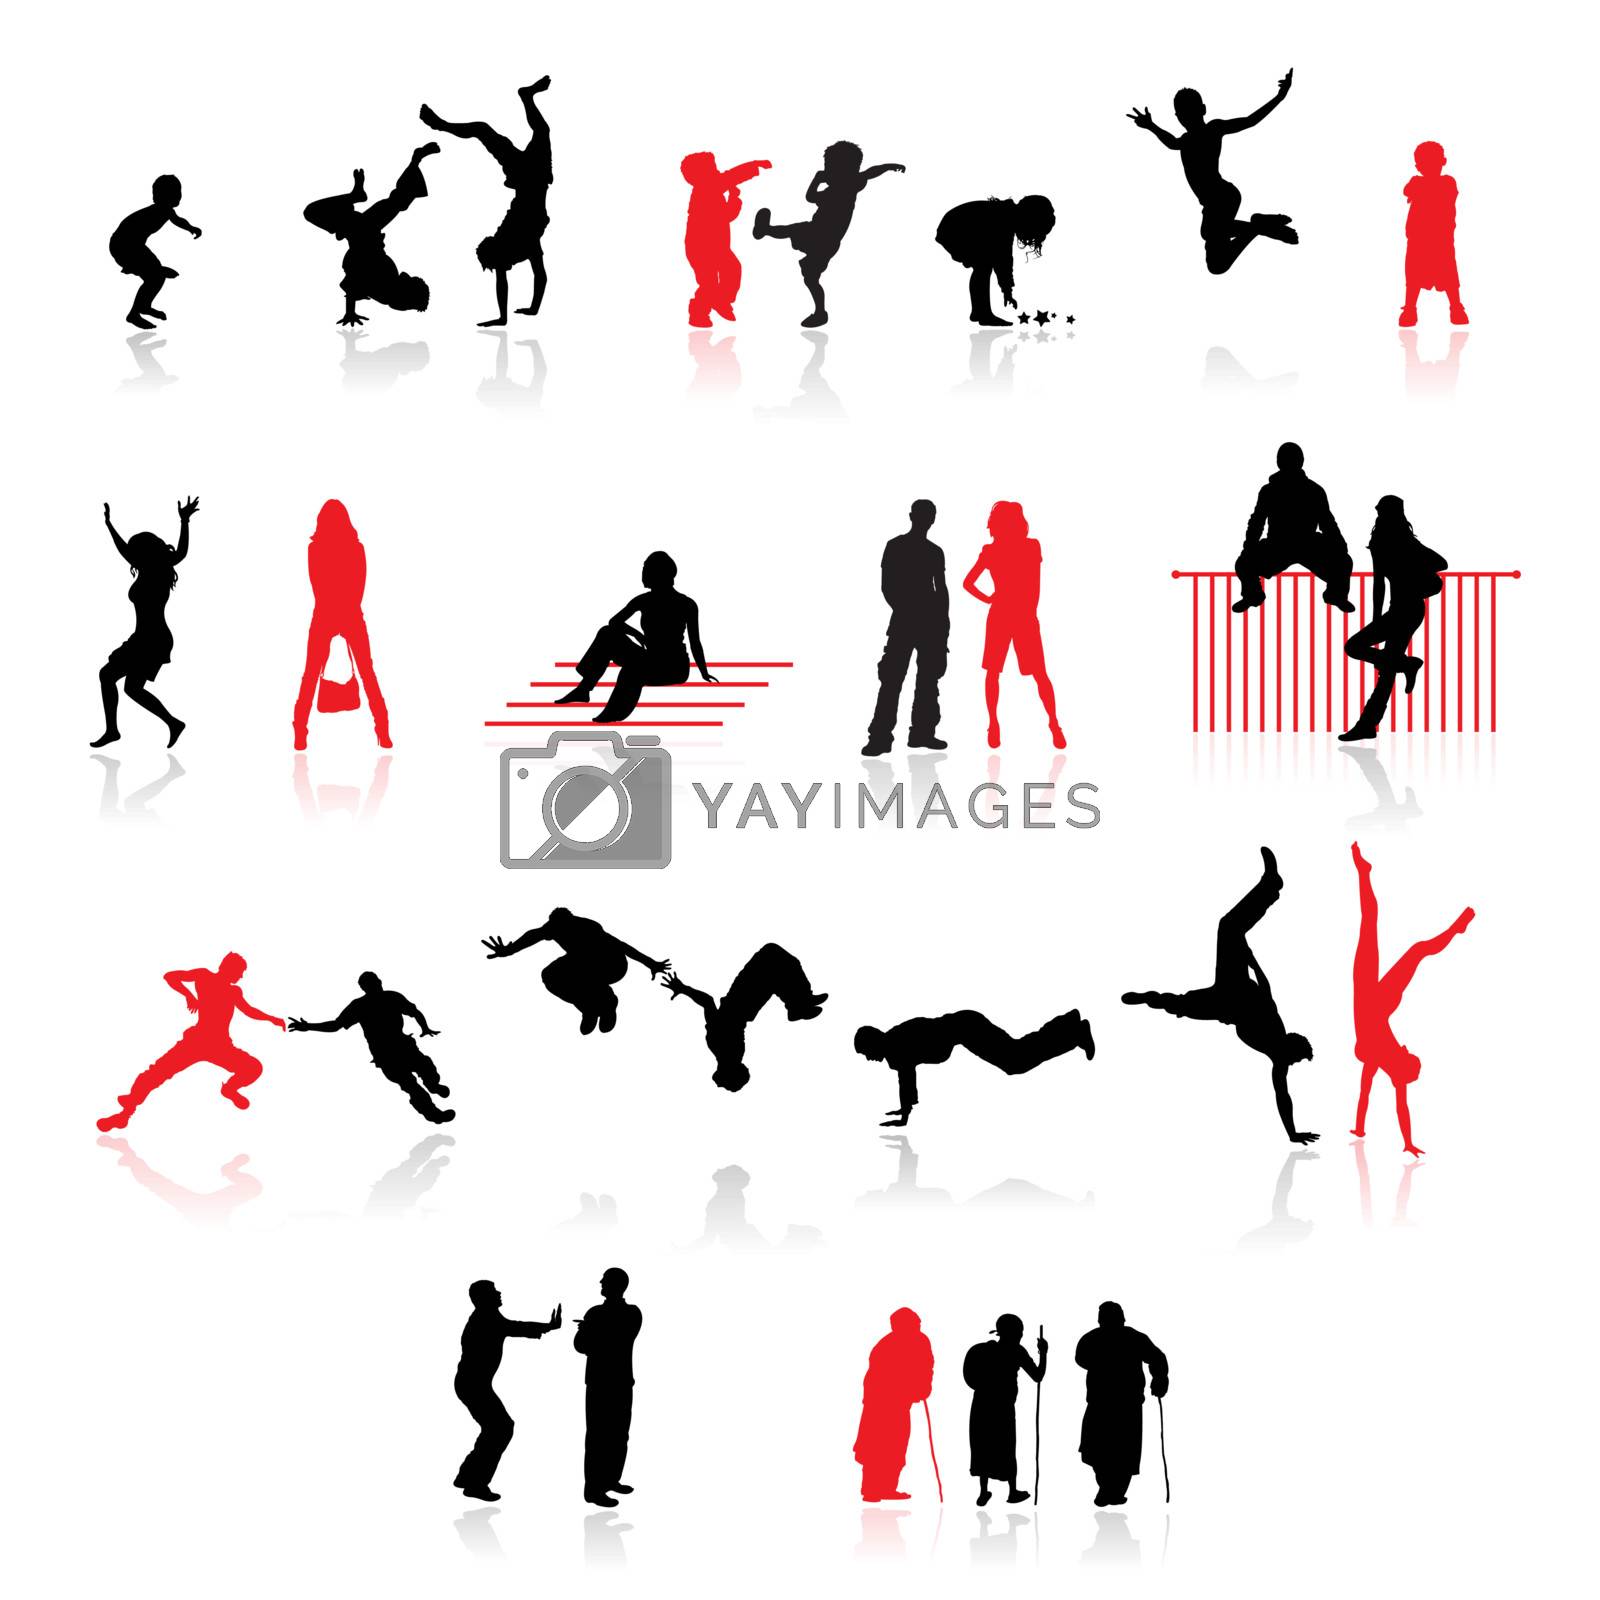 Royalty free image of Silhouettes of people: fun children, couples, sport, old age by Kudryashka